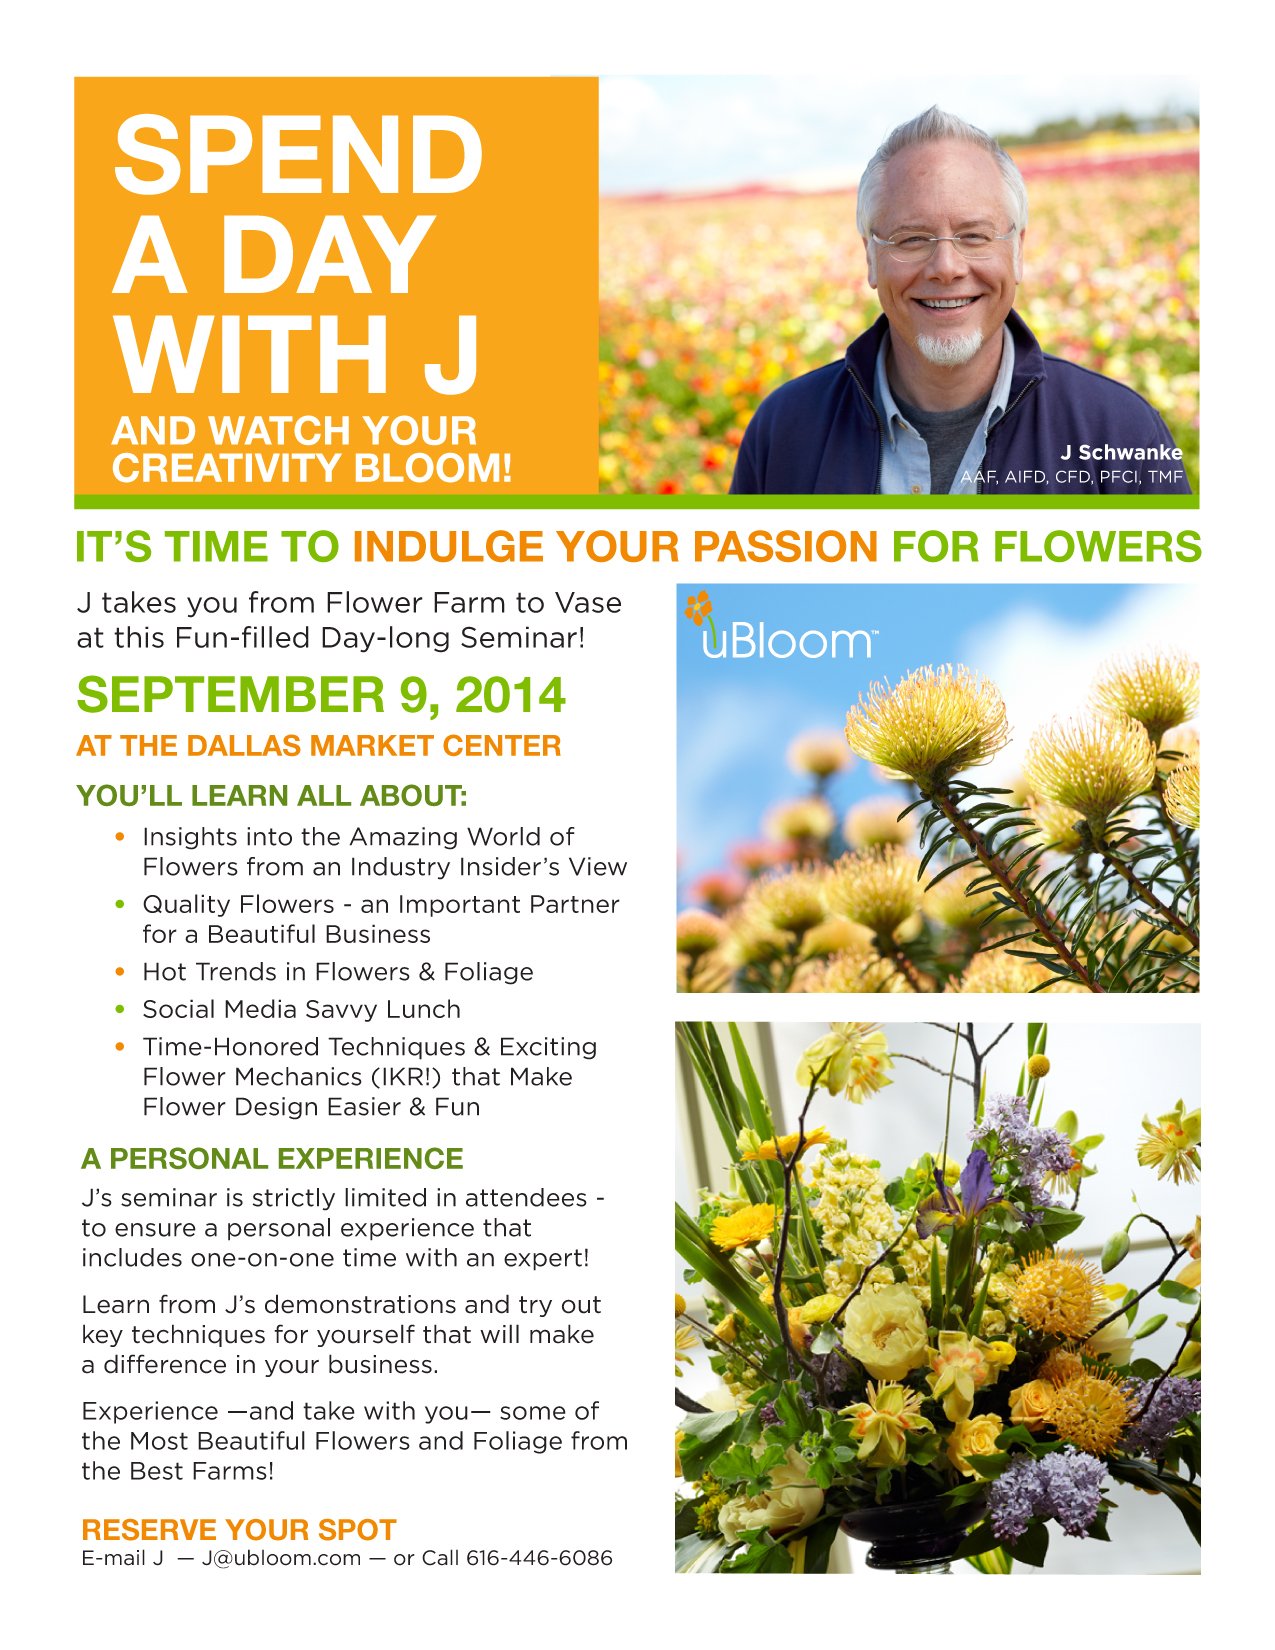 Spend a Day with J in Dallas - September 9, 2014